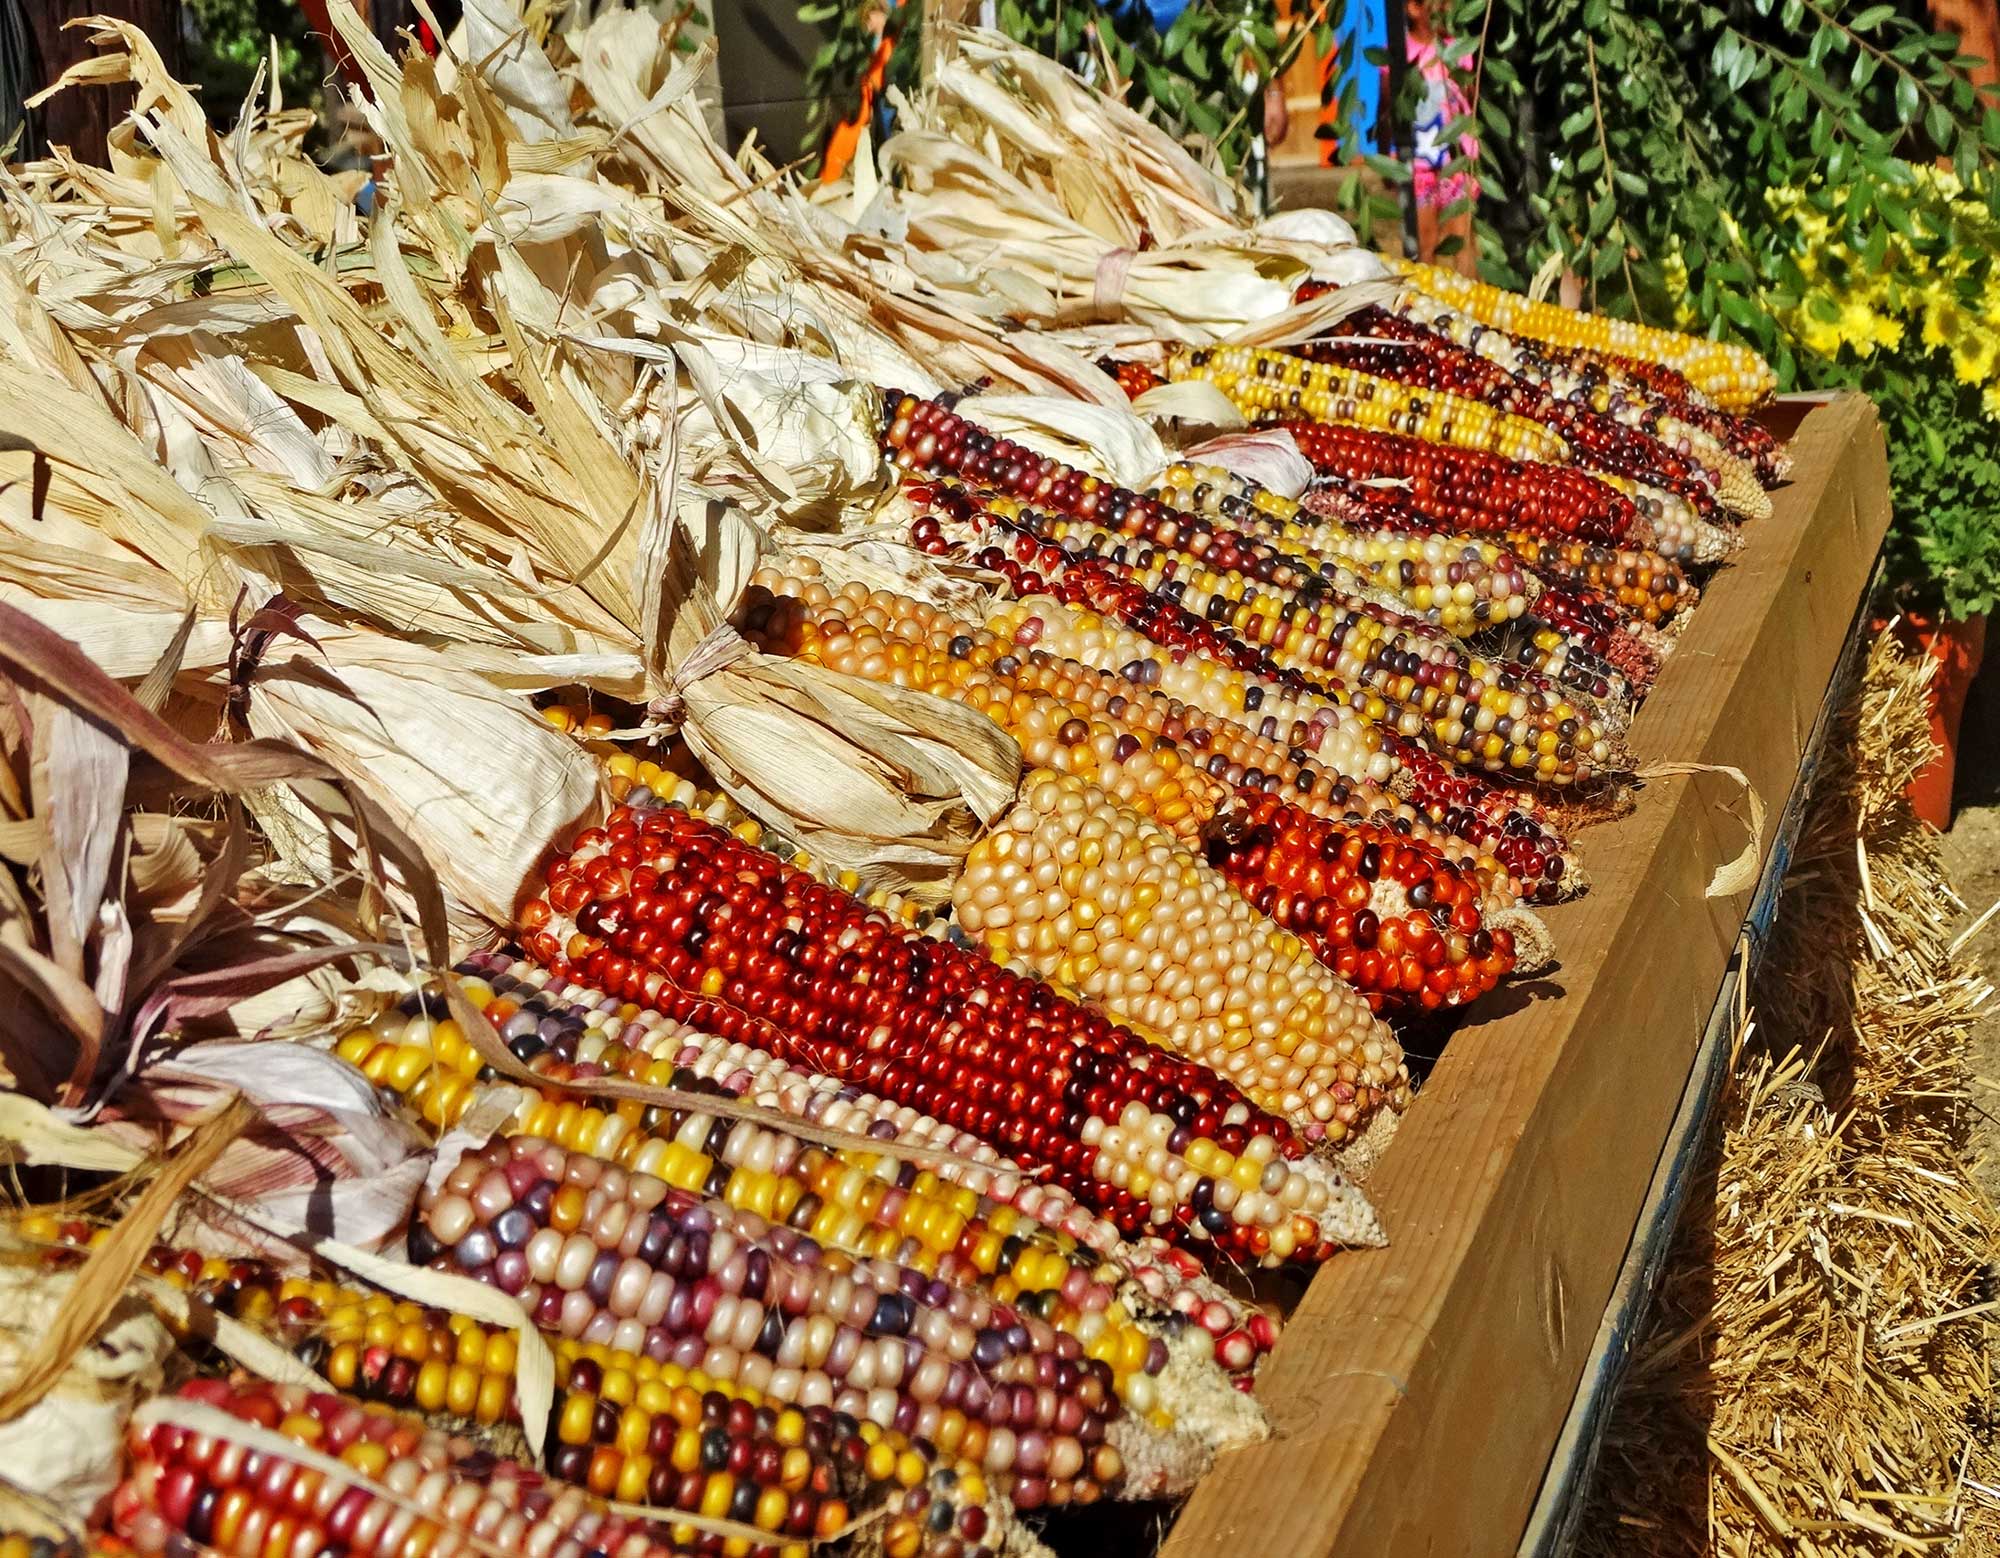 Photograph of flint corn ears lined up on a wooden display stand. The ears are mostly multicolored, ranging from red to yellow to tan.